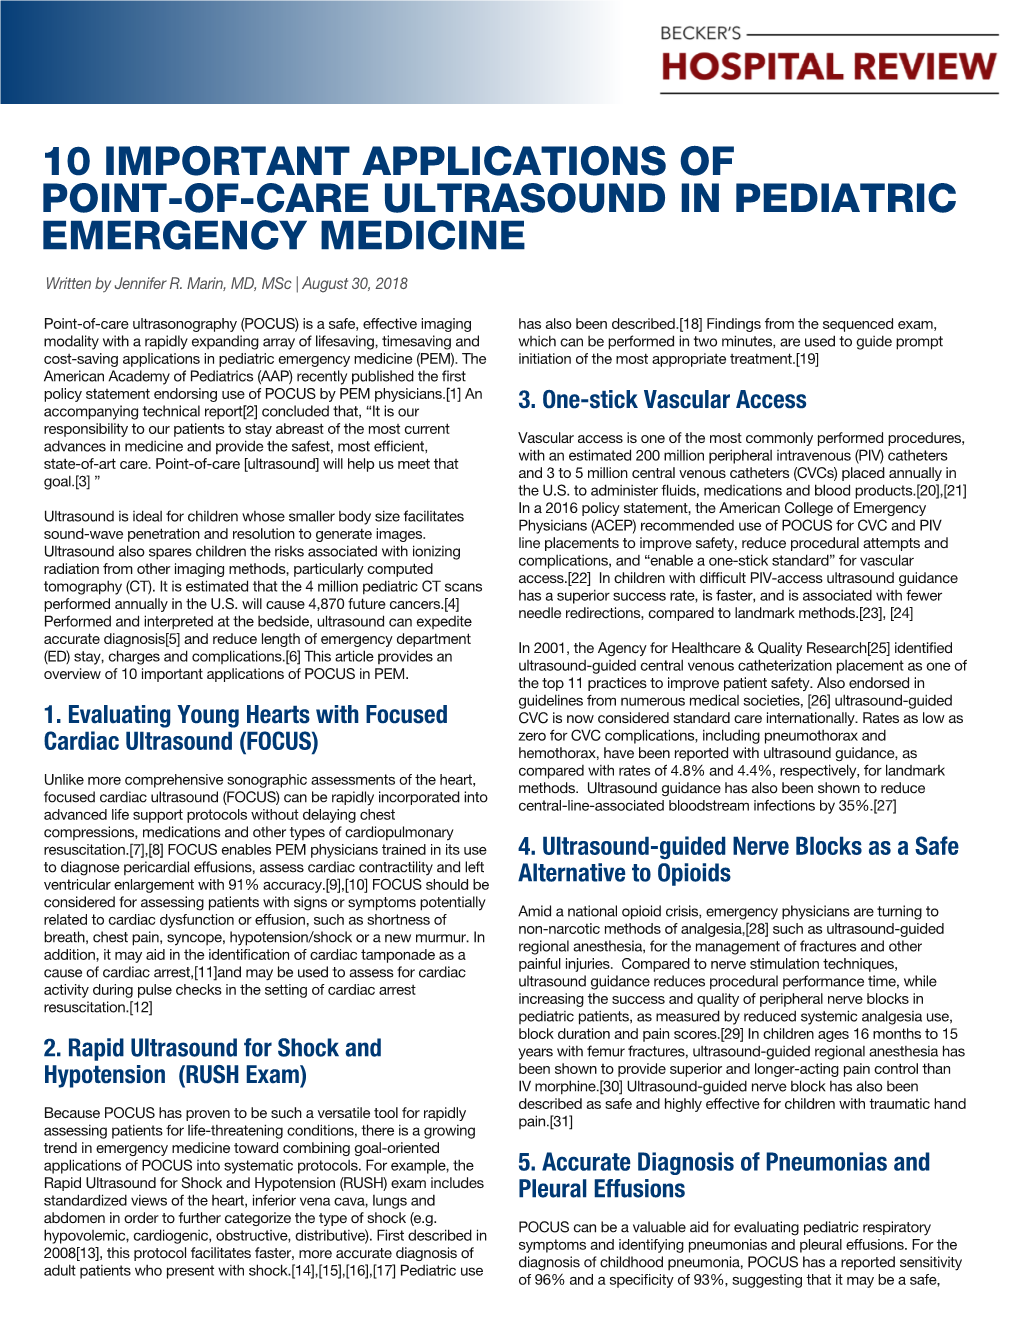 10 Important Applications of Point-Of-Care Ultrasound In